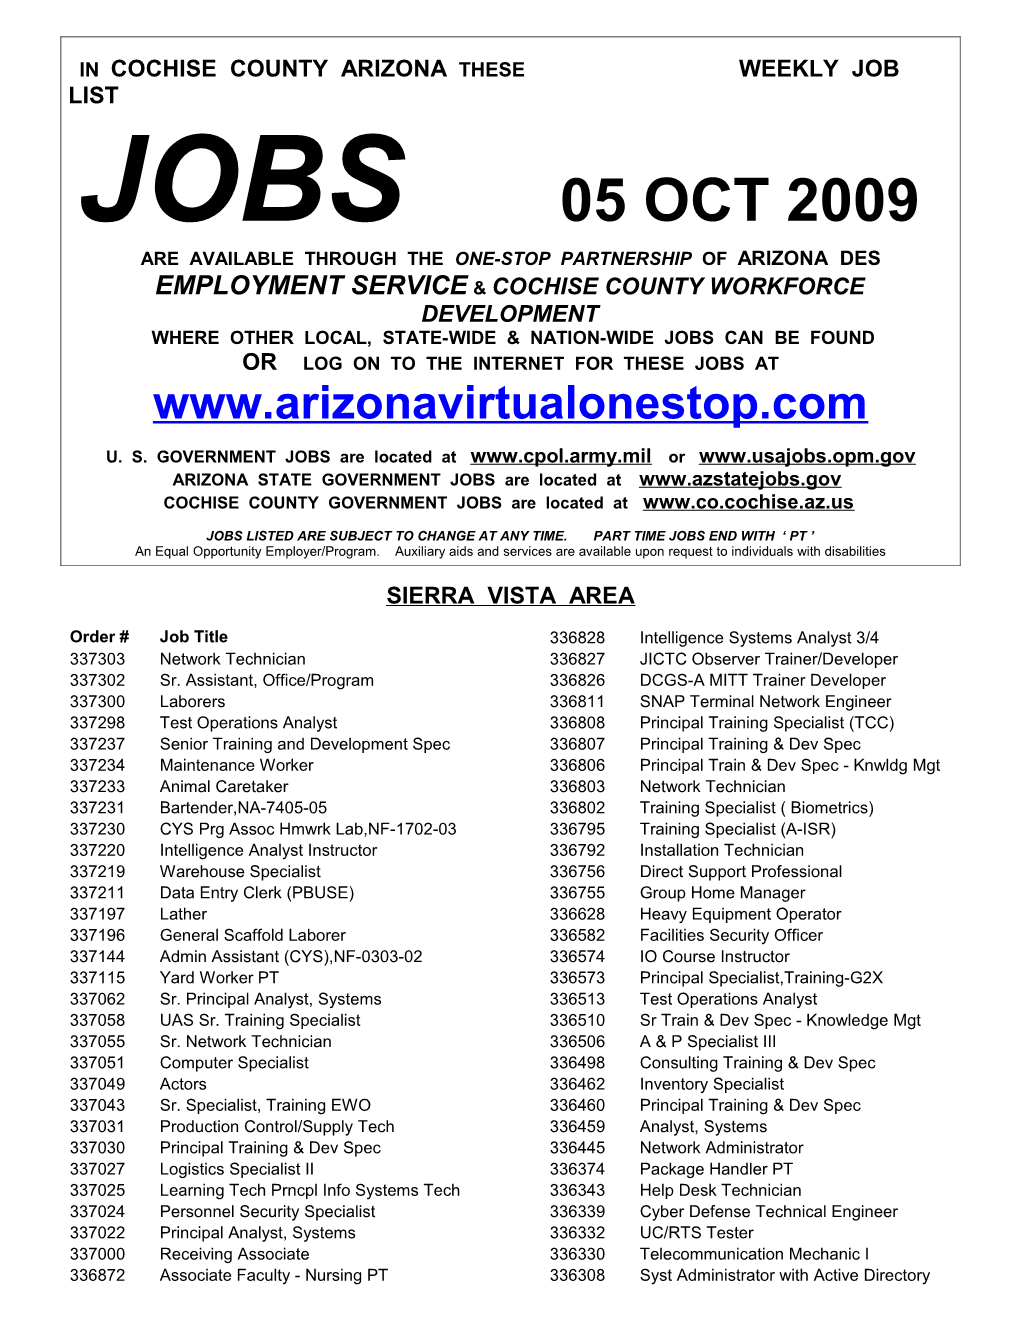 In Cochise County Arizona These Weekly Job List